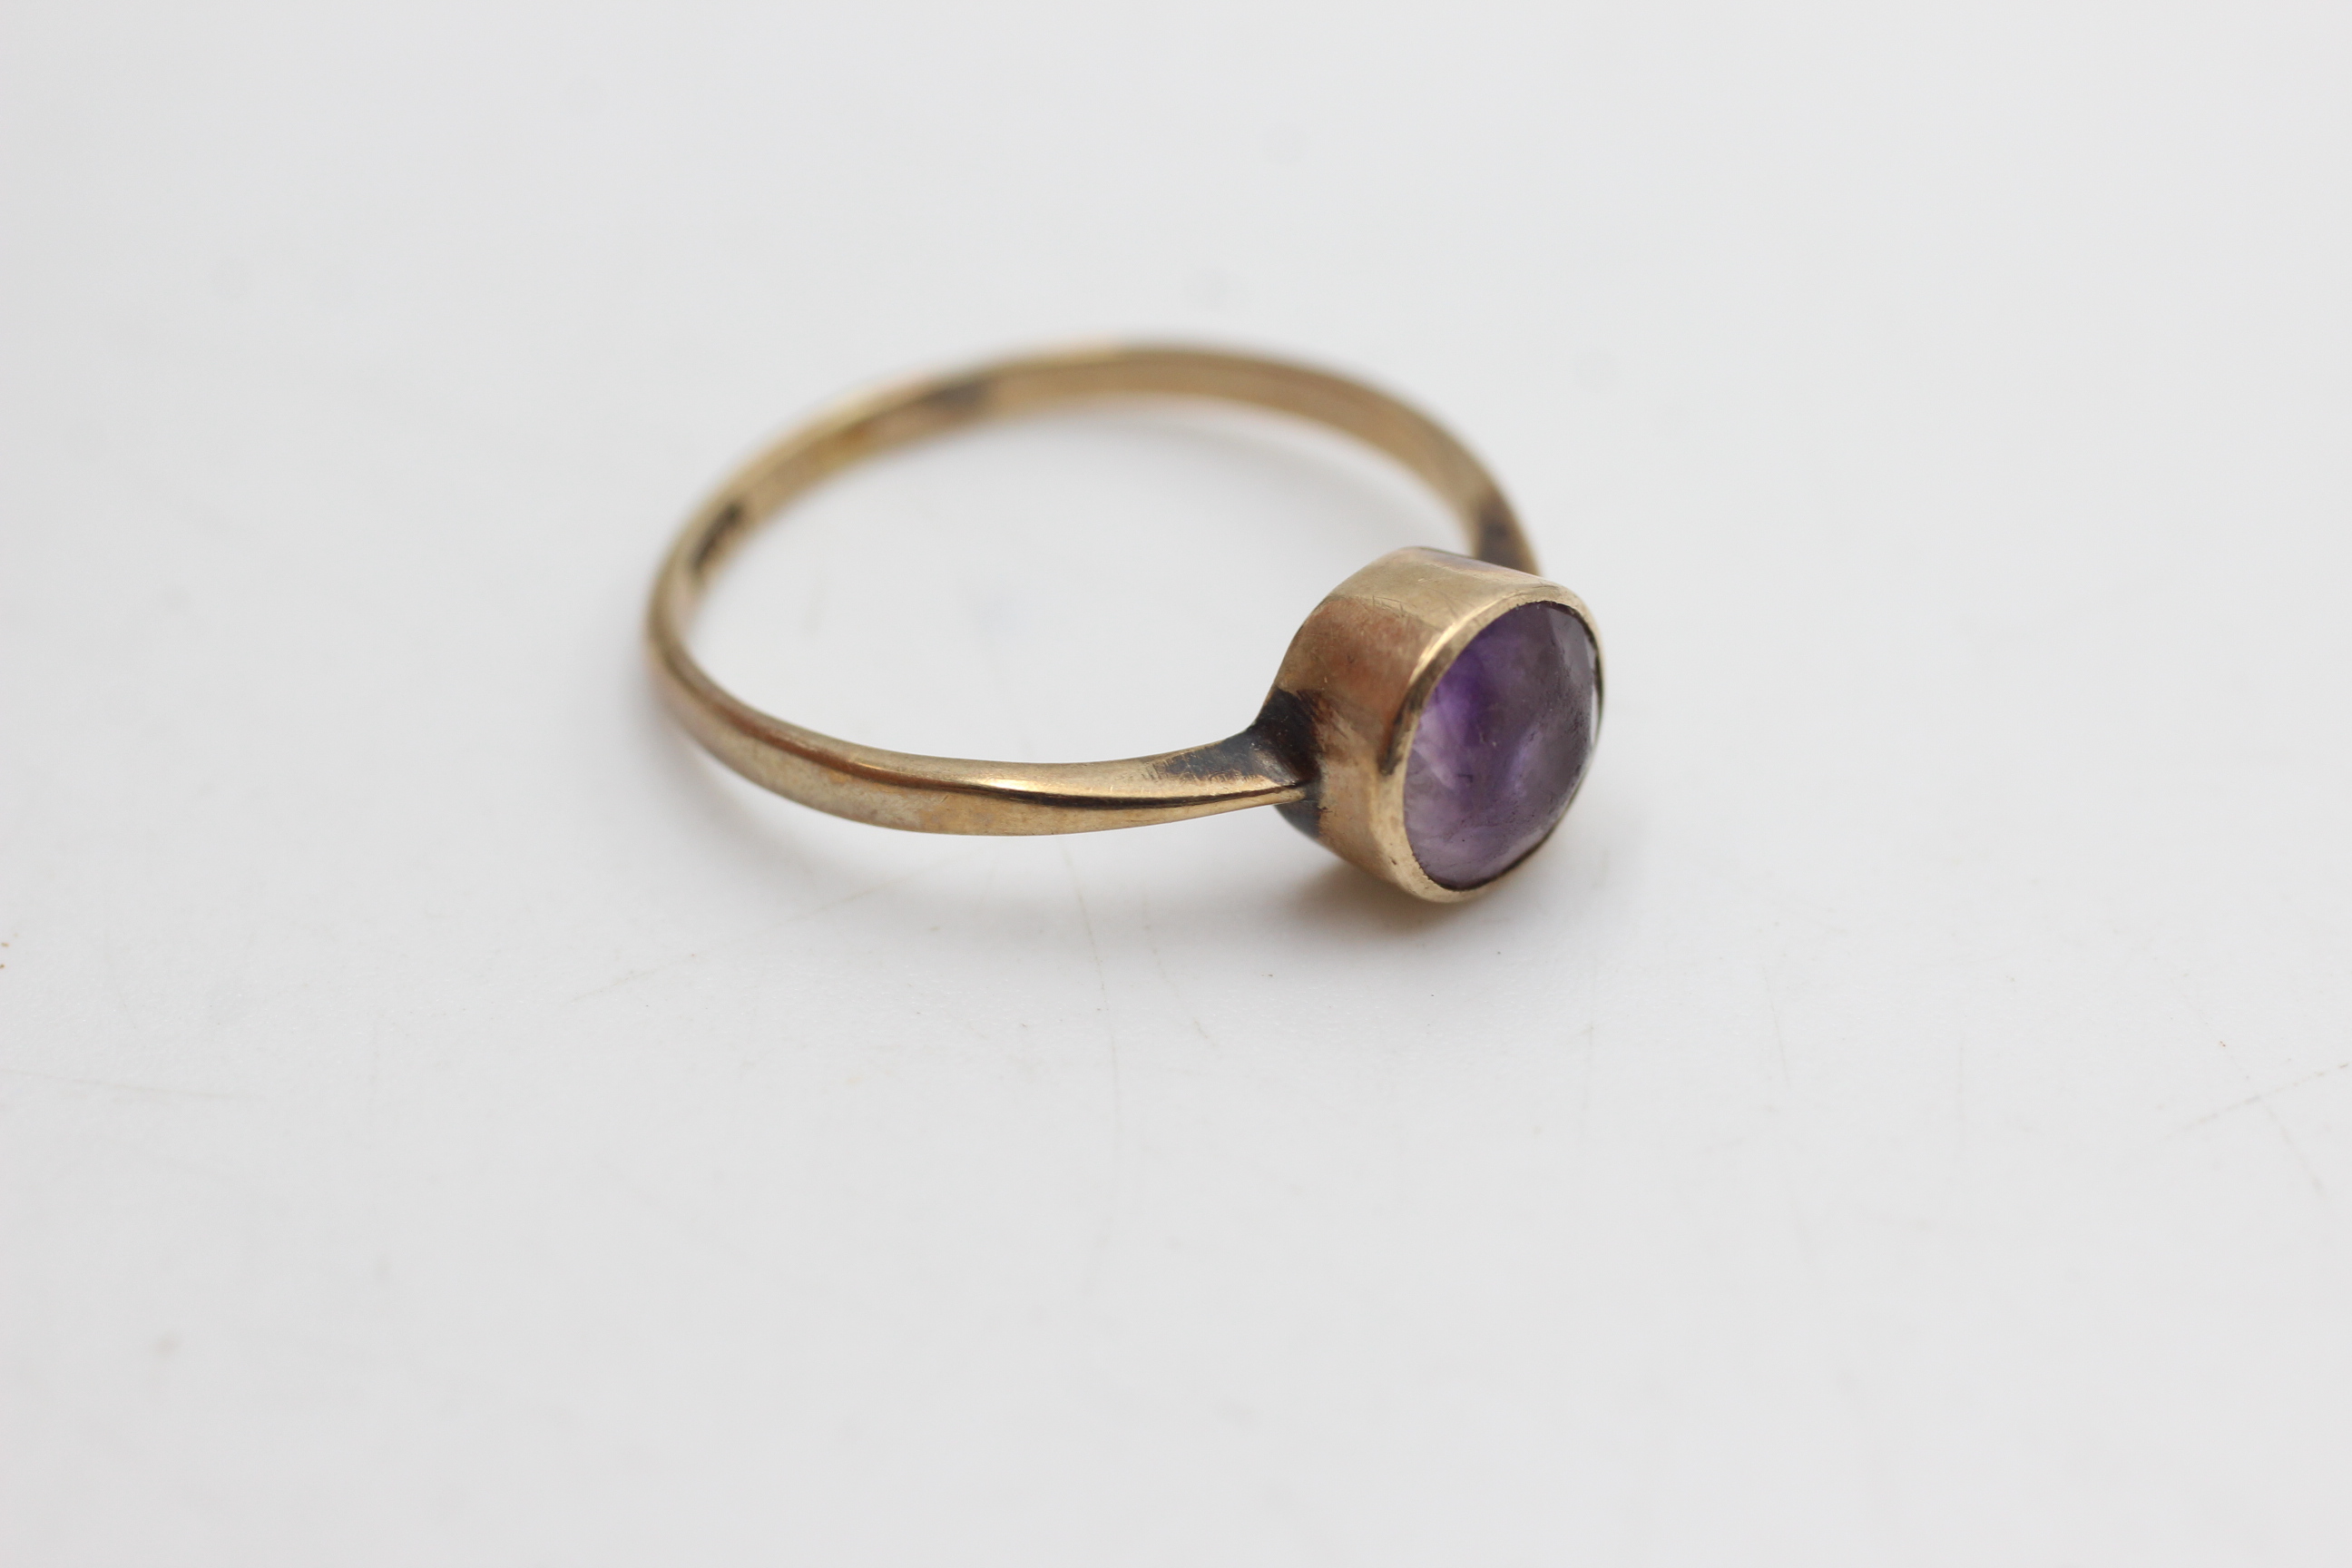 9ct gold antique amethyst ring (1.8g) - Image 2 of 4